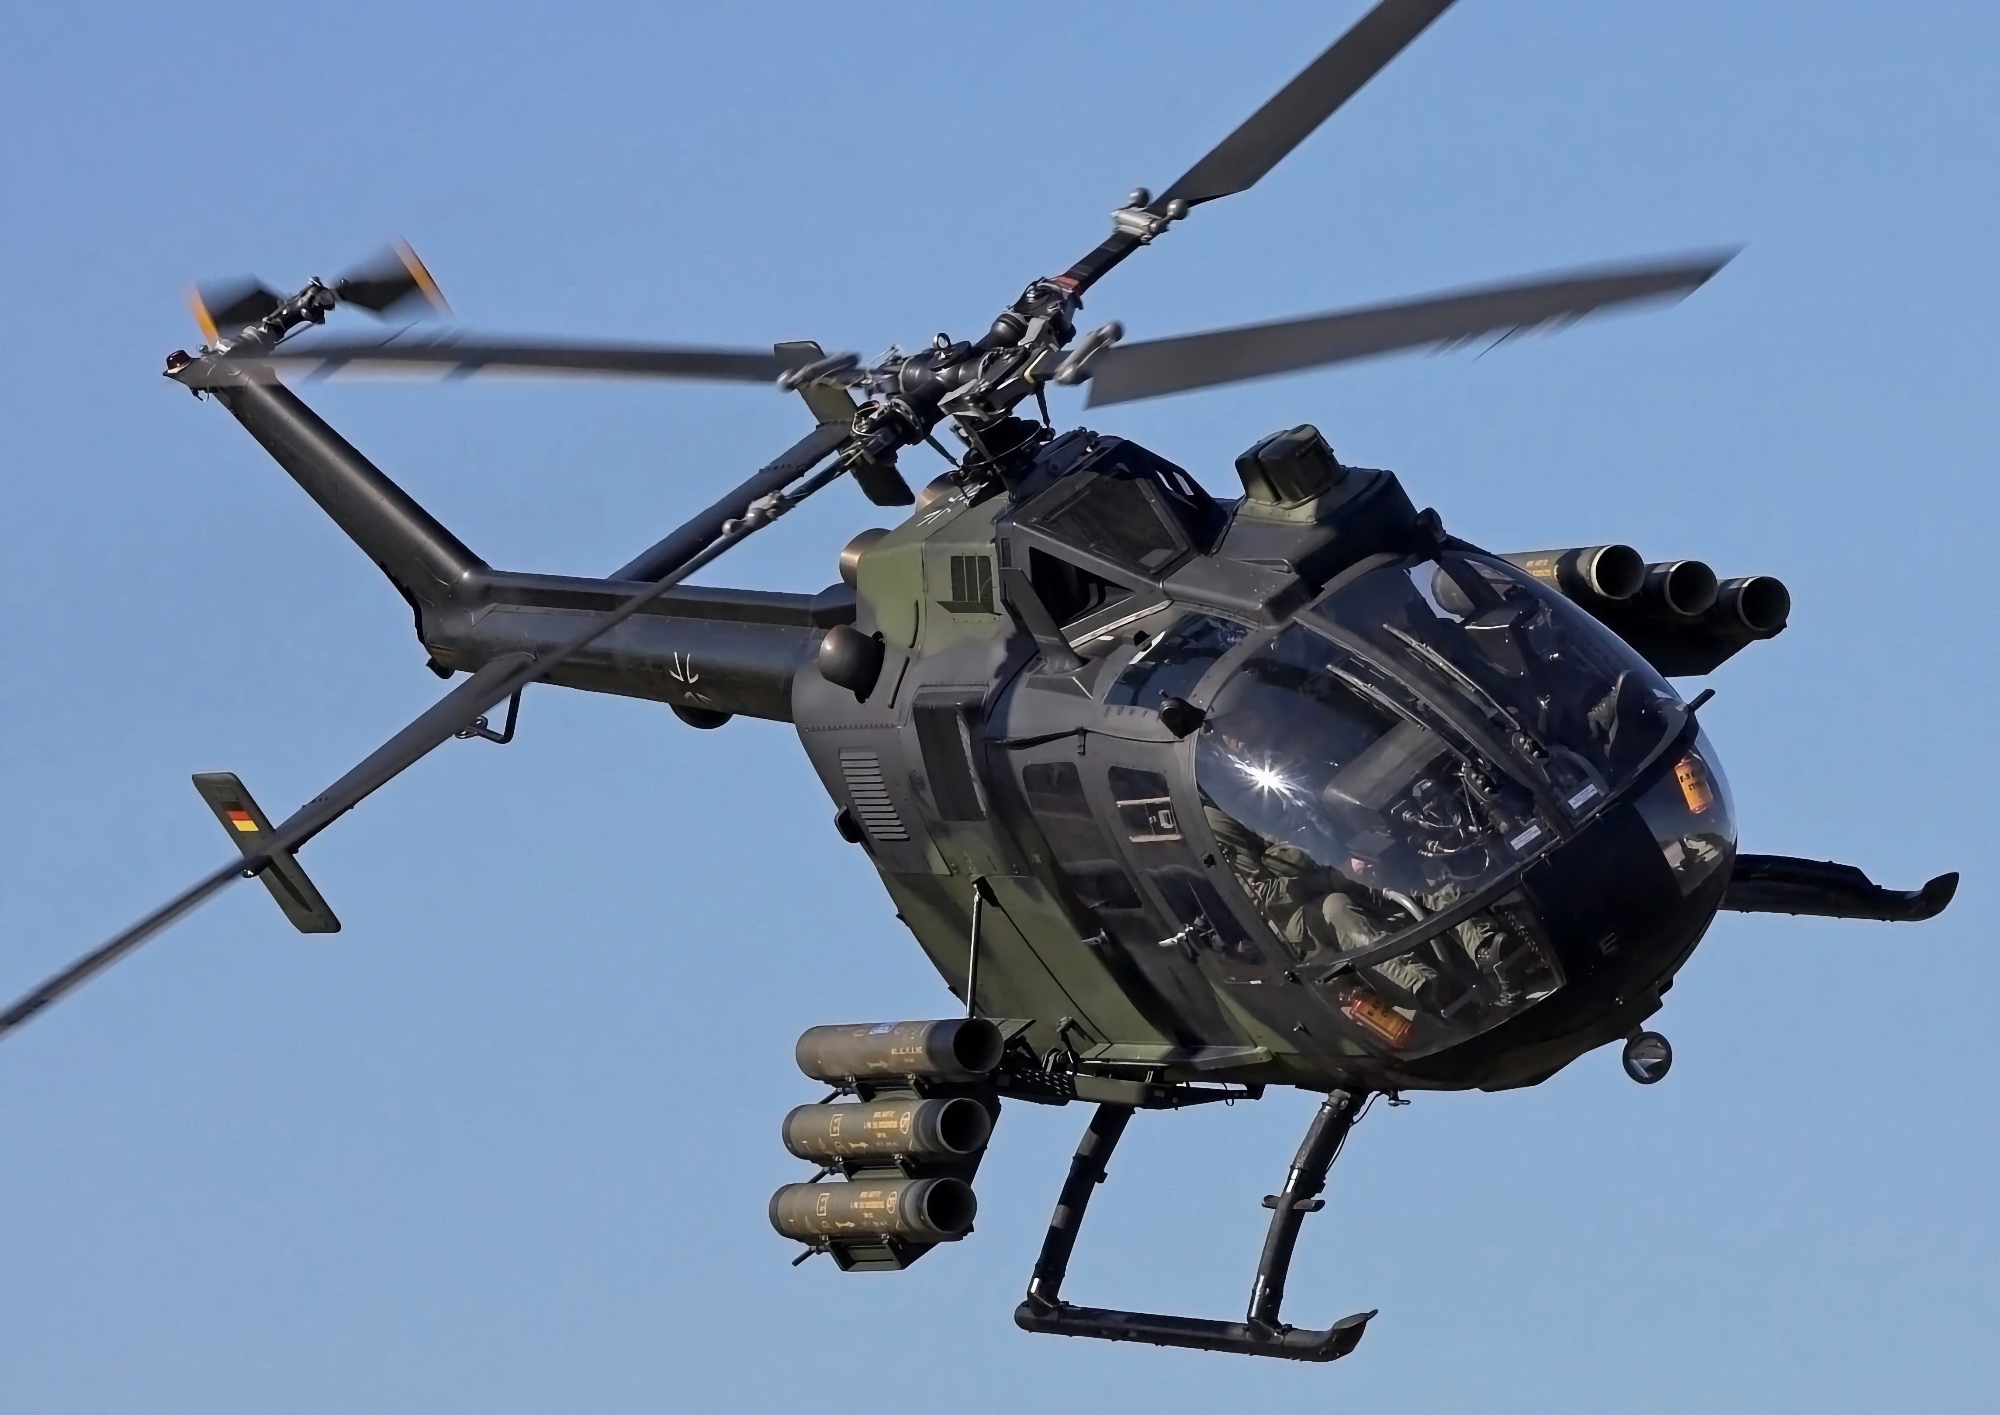 The AFU wants to receive German Bo 105-E4 helicopters and Austrian KTM 450 EXC motorbikes for armament